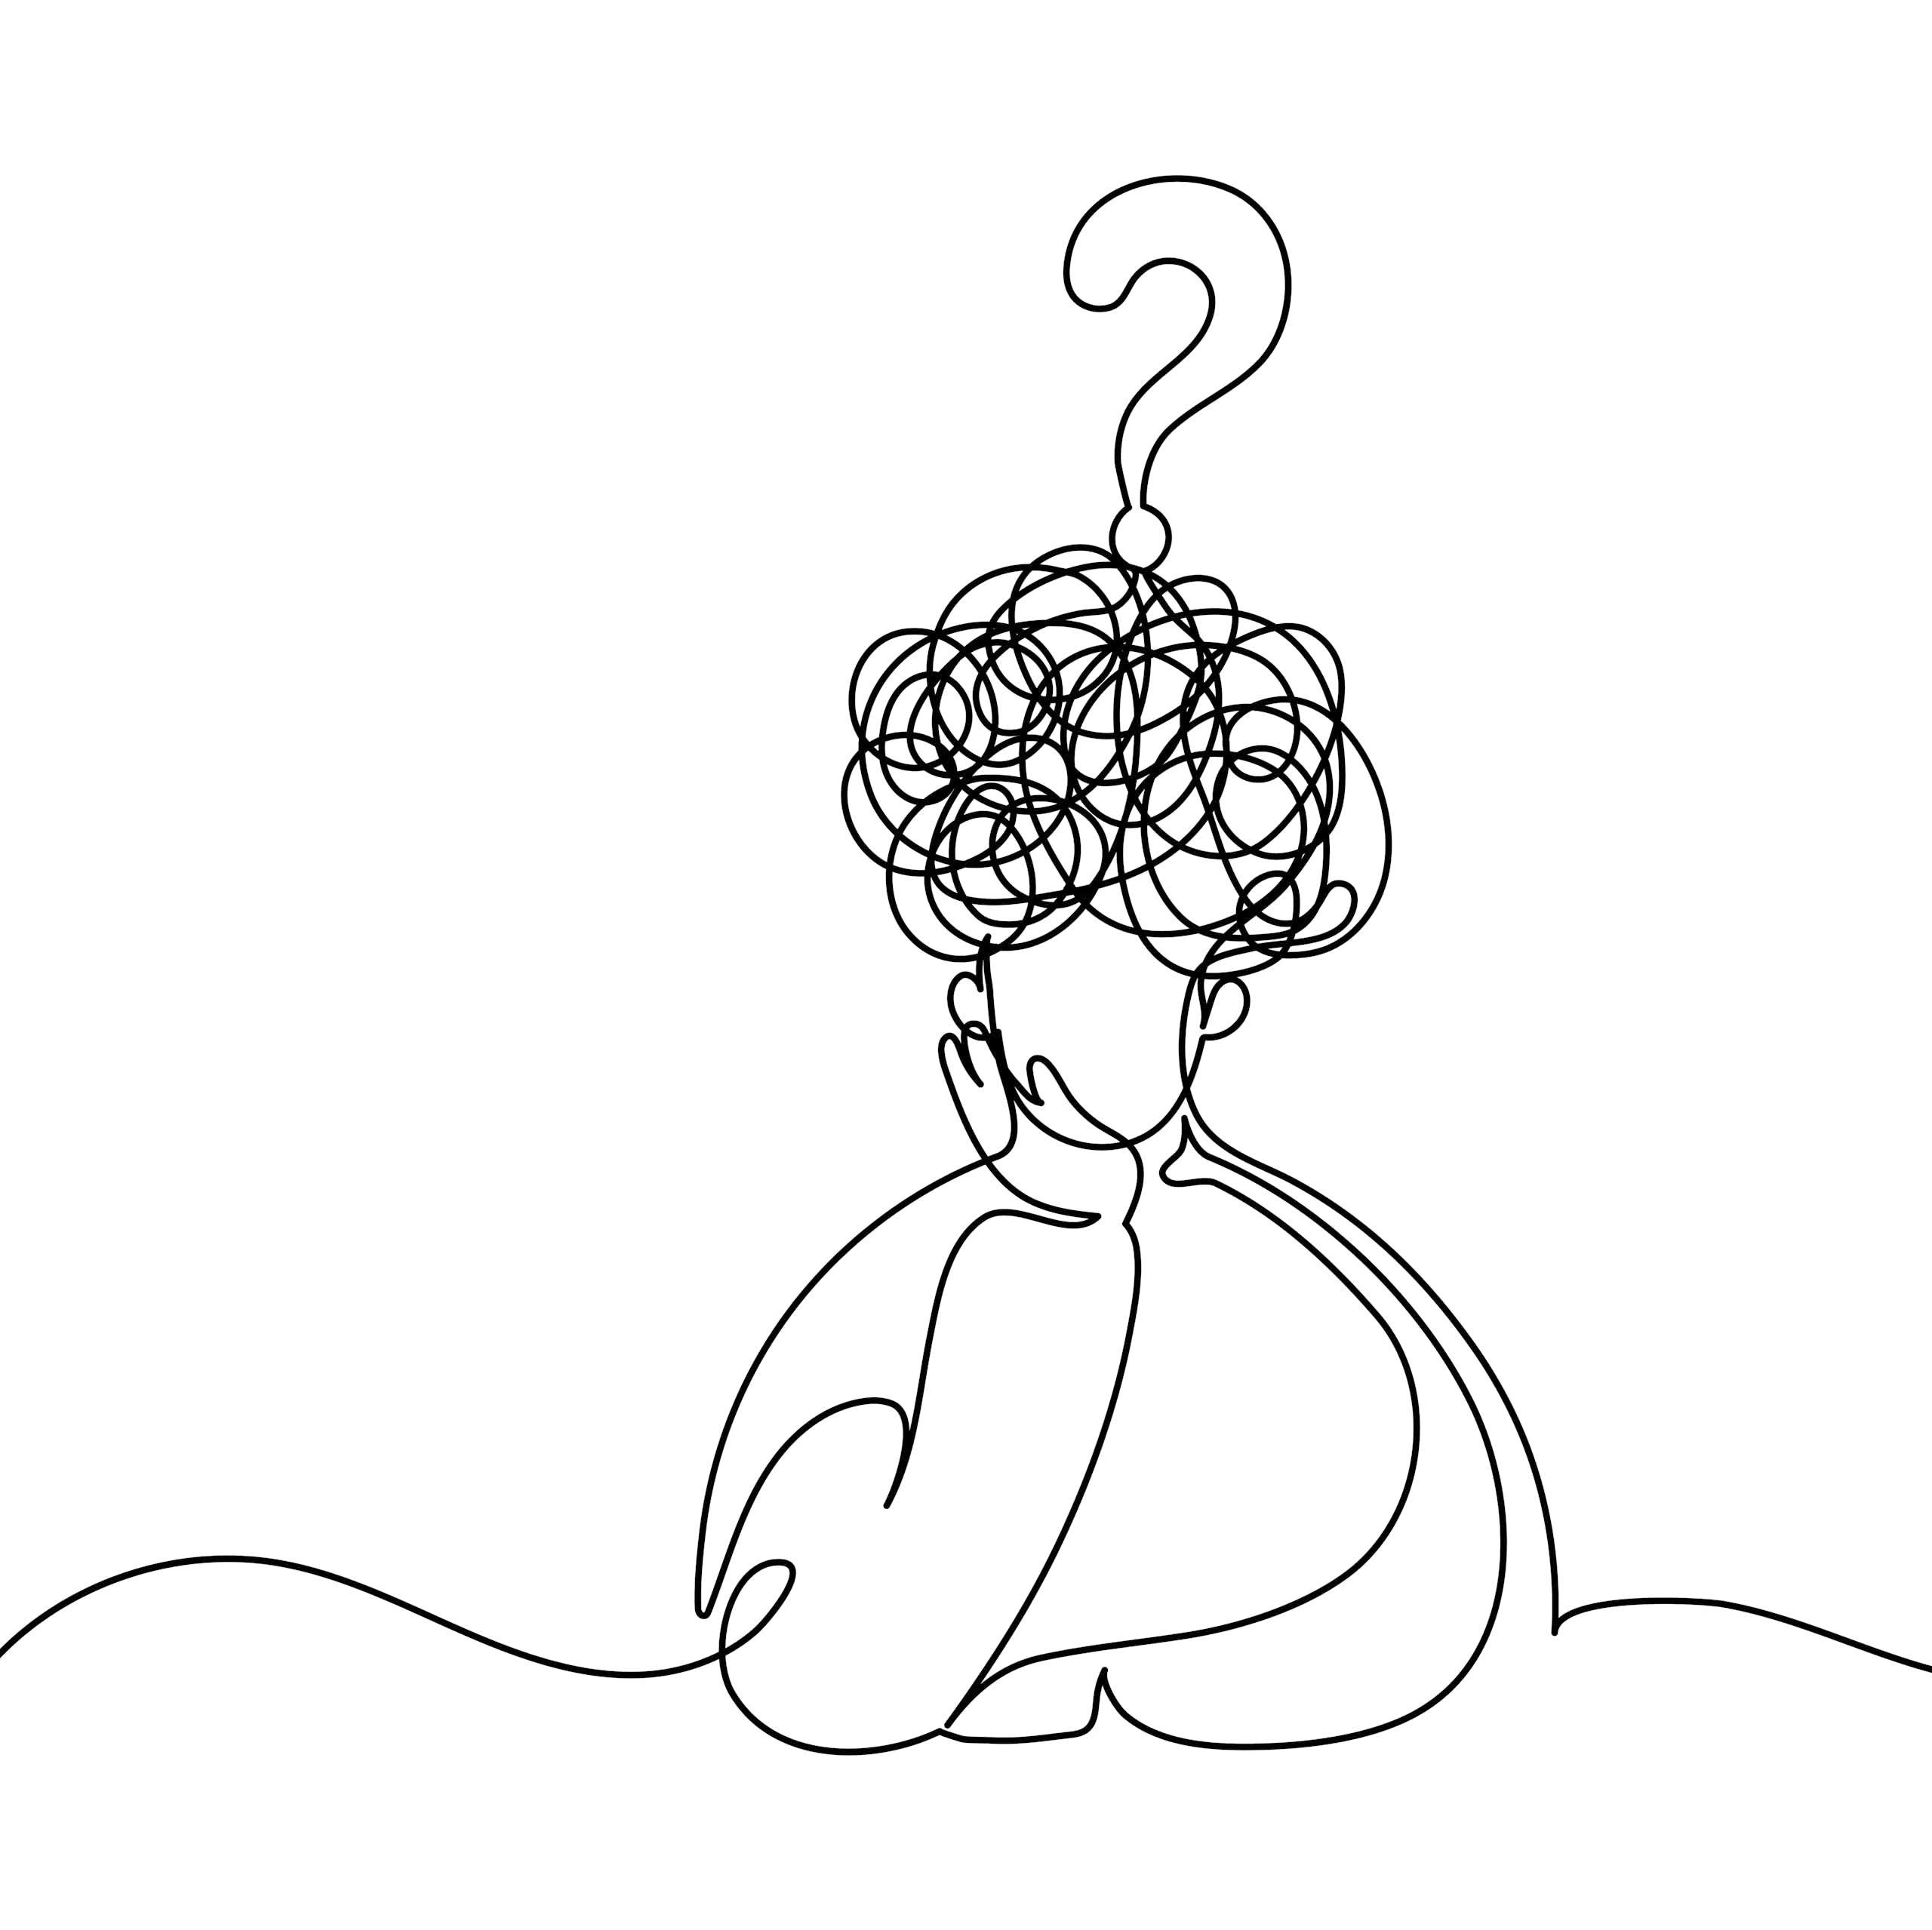 A line drawing of a person whose head is surrounded by loops of confusion, with a question mark atop it all.